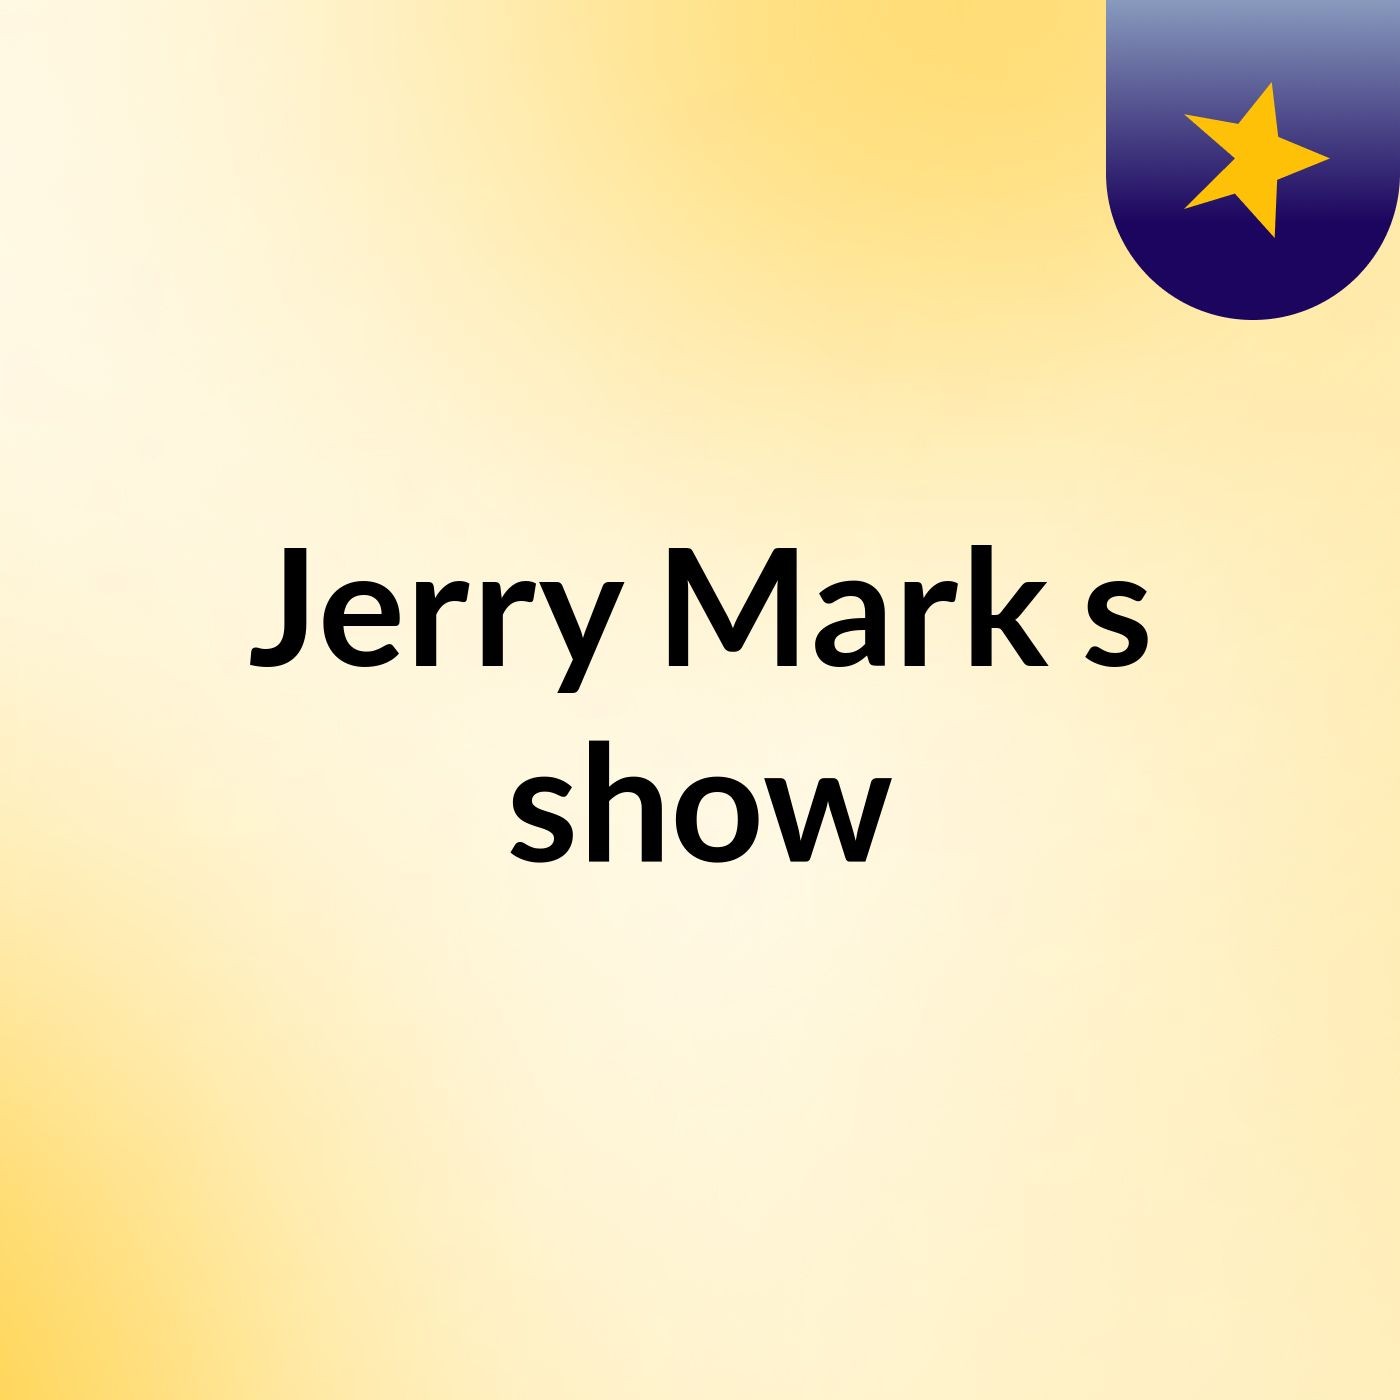 Jerry Mark's show